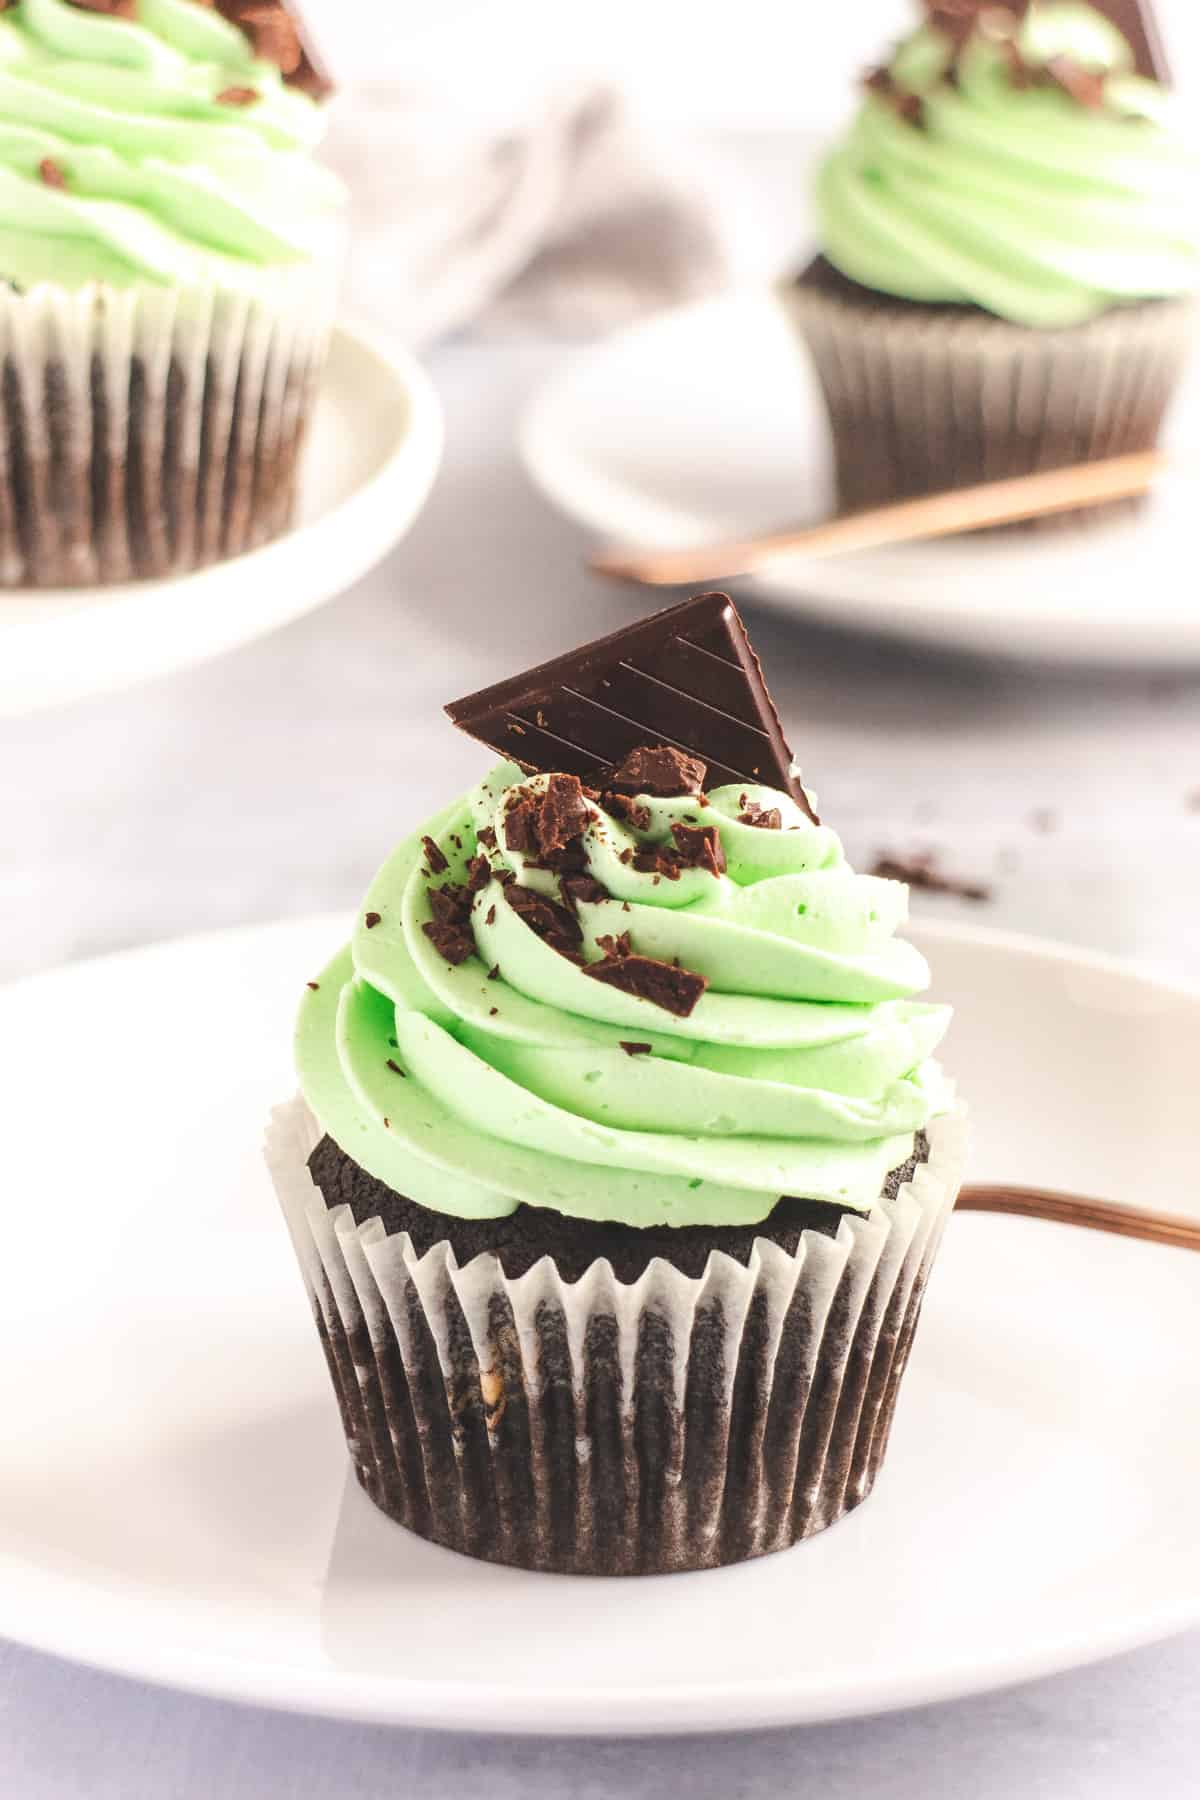 Chocolate cupcake with mint green frosting on a white plate